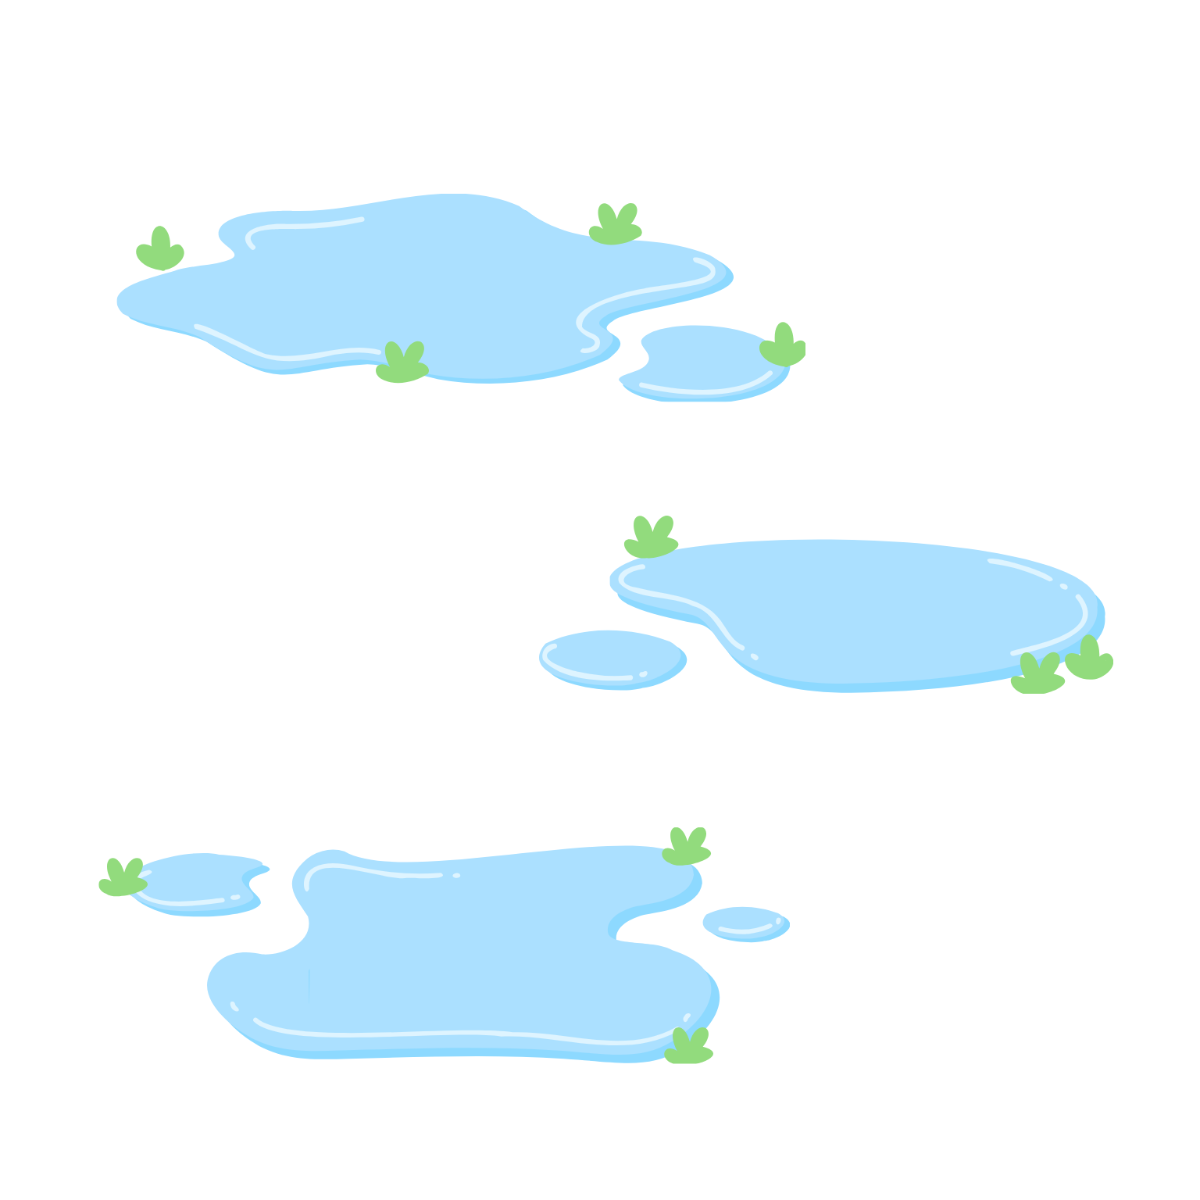 Puddle of Water Vector Template